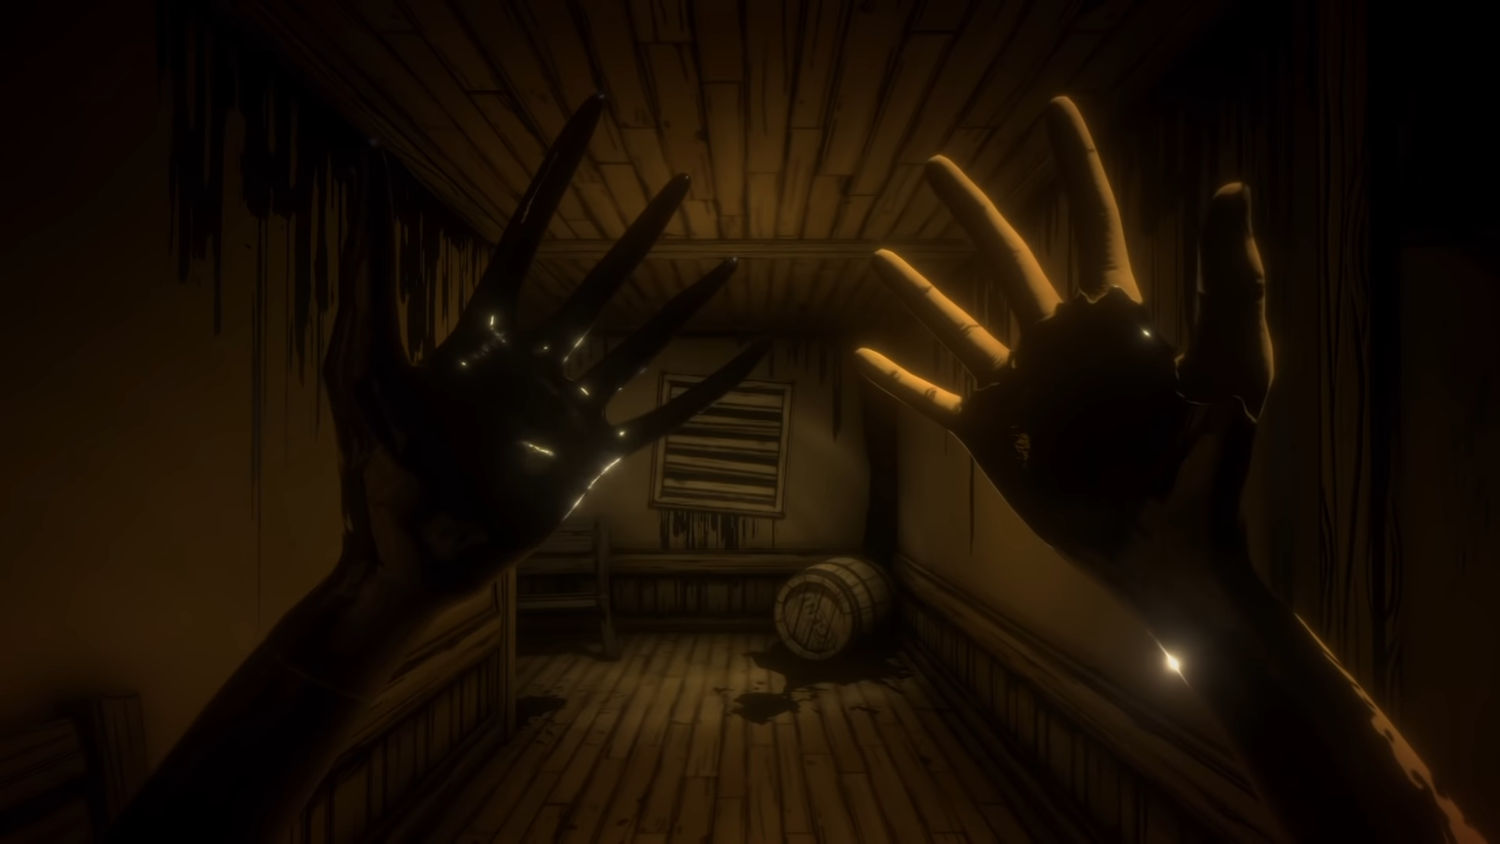 Bendy and the Dark Revival for PS5, Xbox Series, PS4, and Xbox One